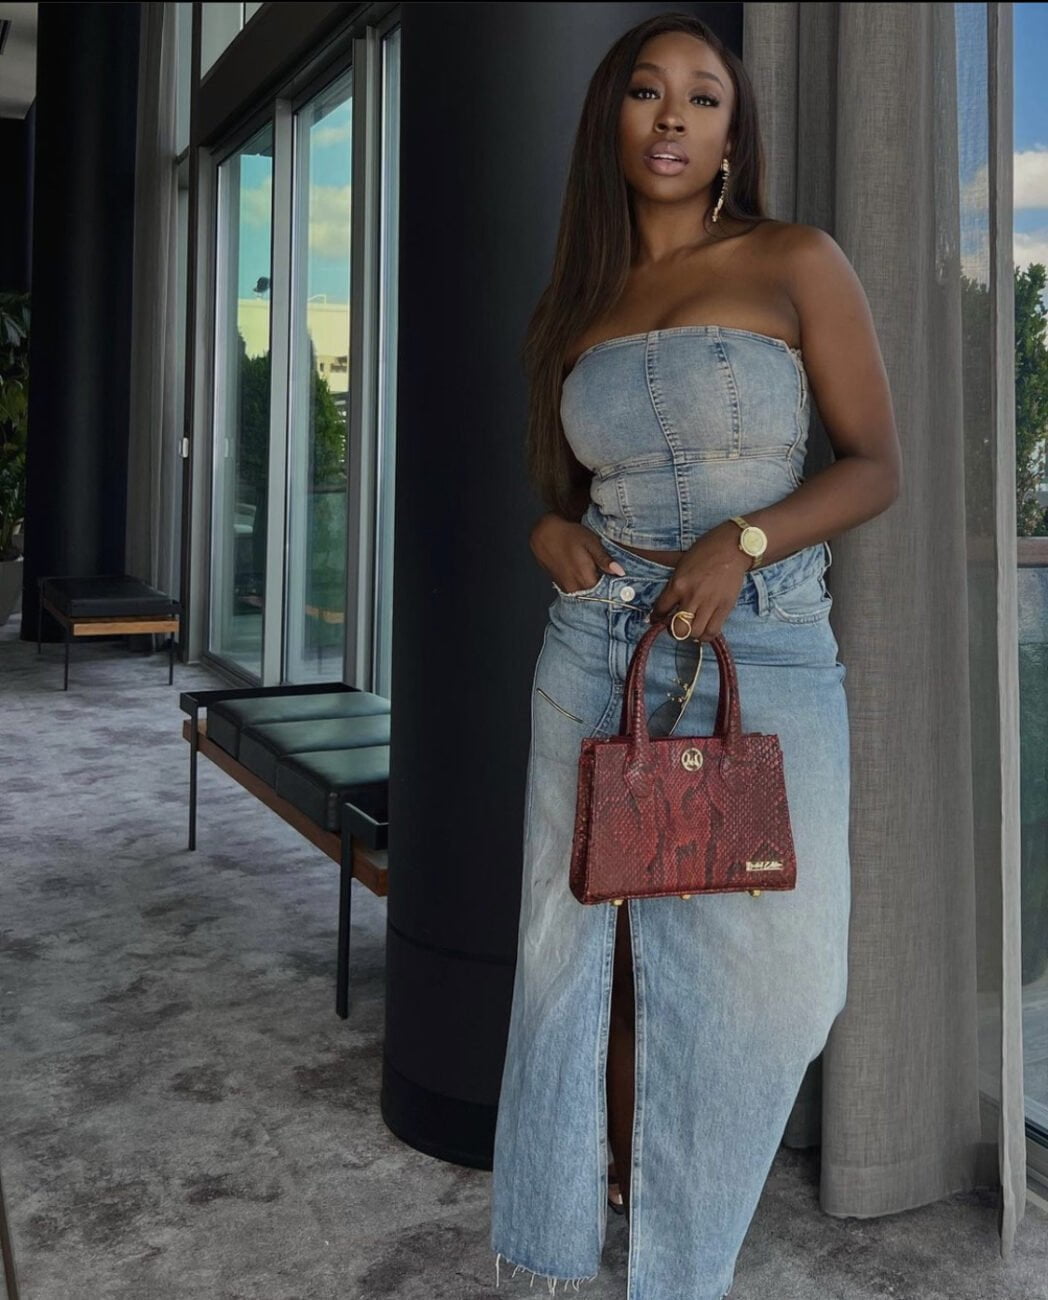 Slaying in denim again: Beverly Naya pairs a sleeveless denim top with a maxi  skirt and adds a pop of red with a handbag.